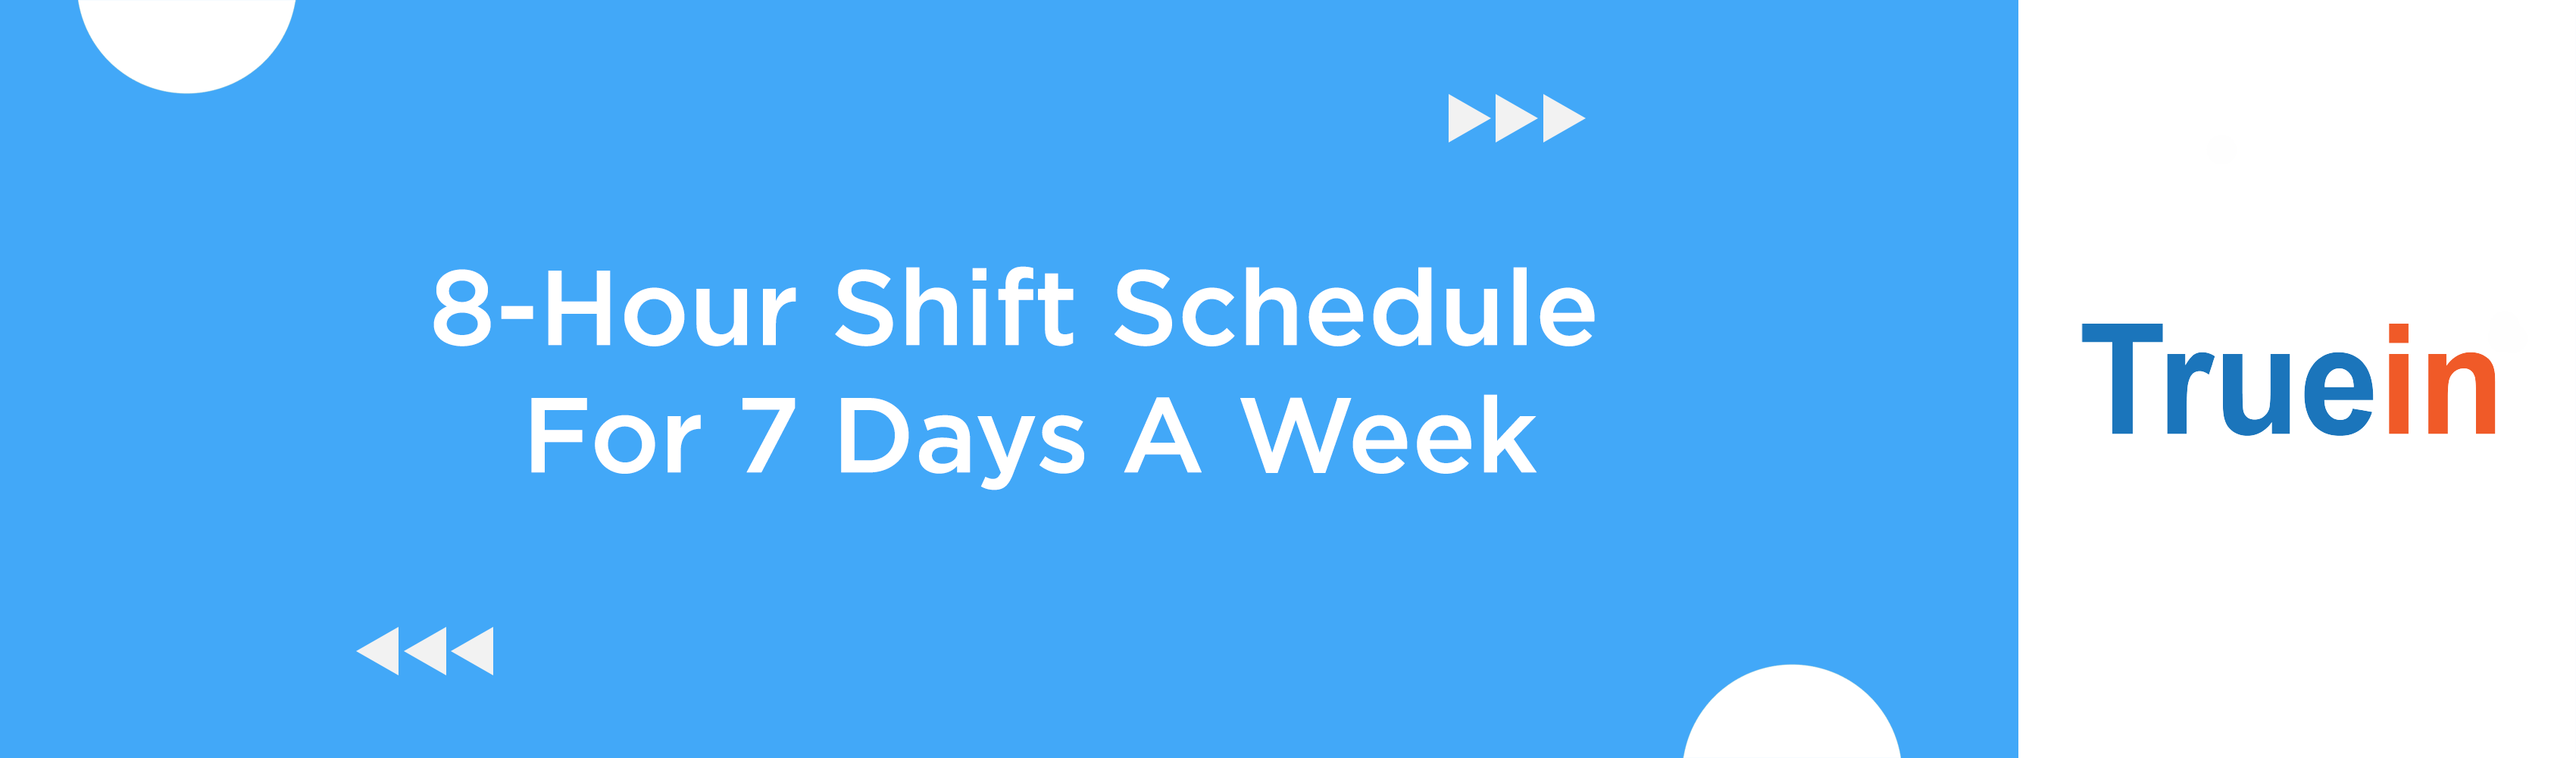 8-Hour Shift Schedule For 7 Days A Week